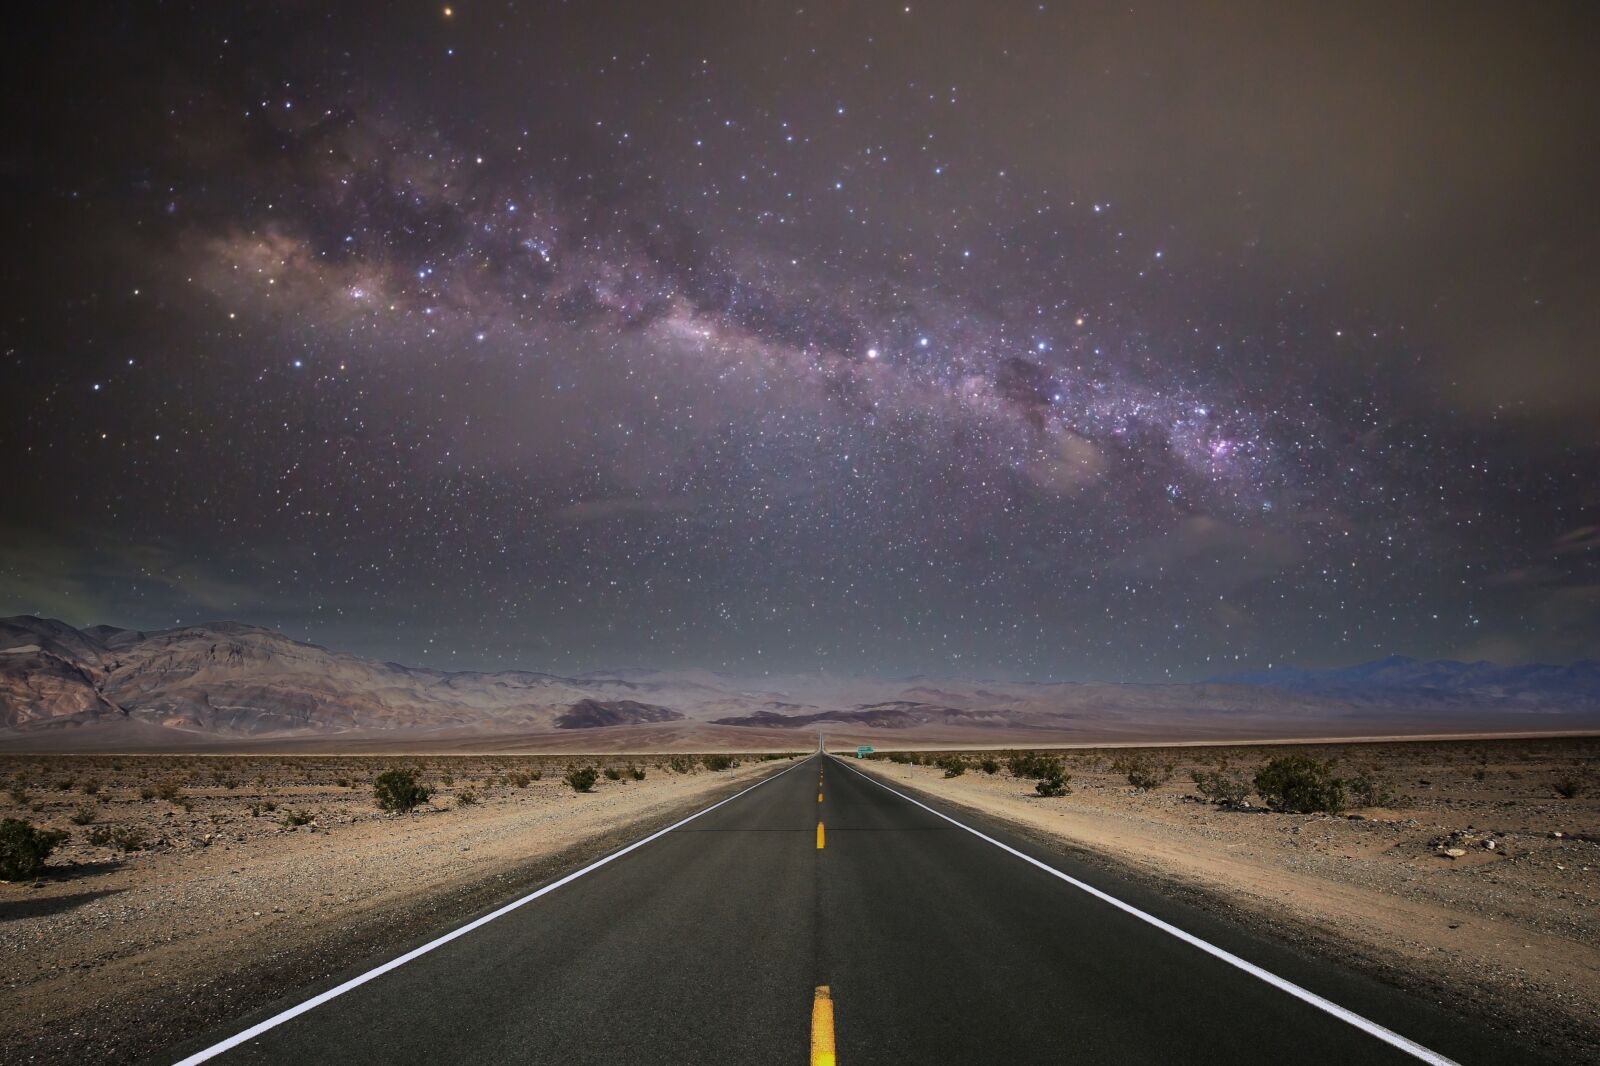 death valley desert, california one of the best dark sky locations in the US 